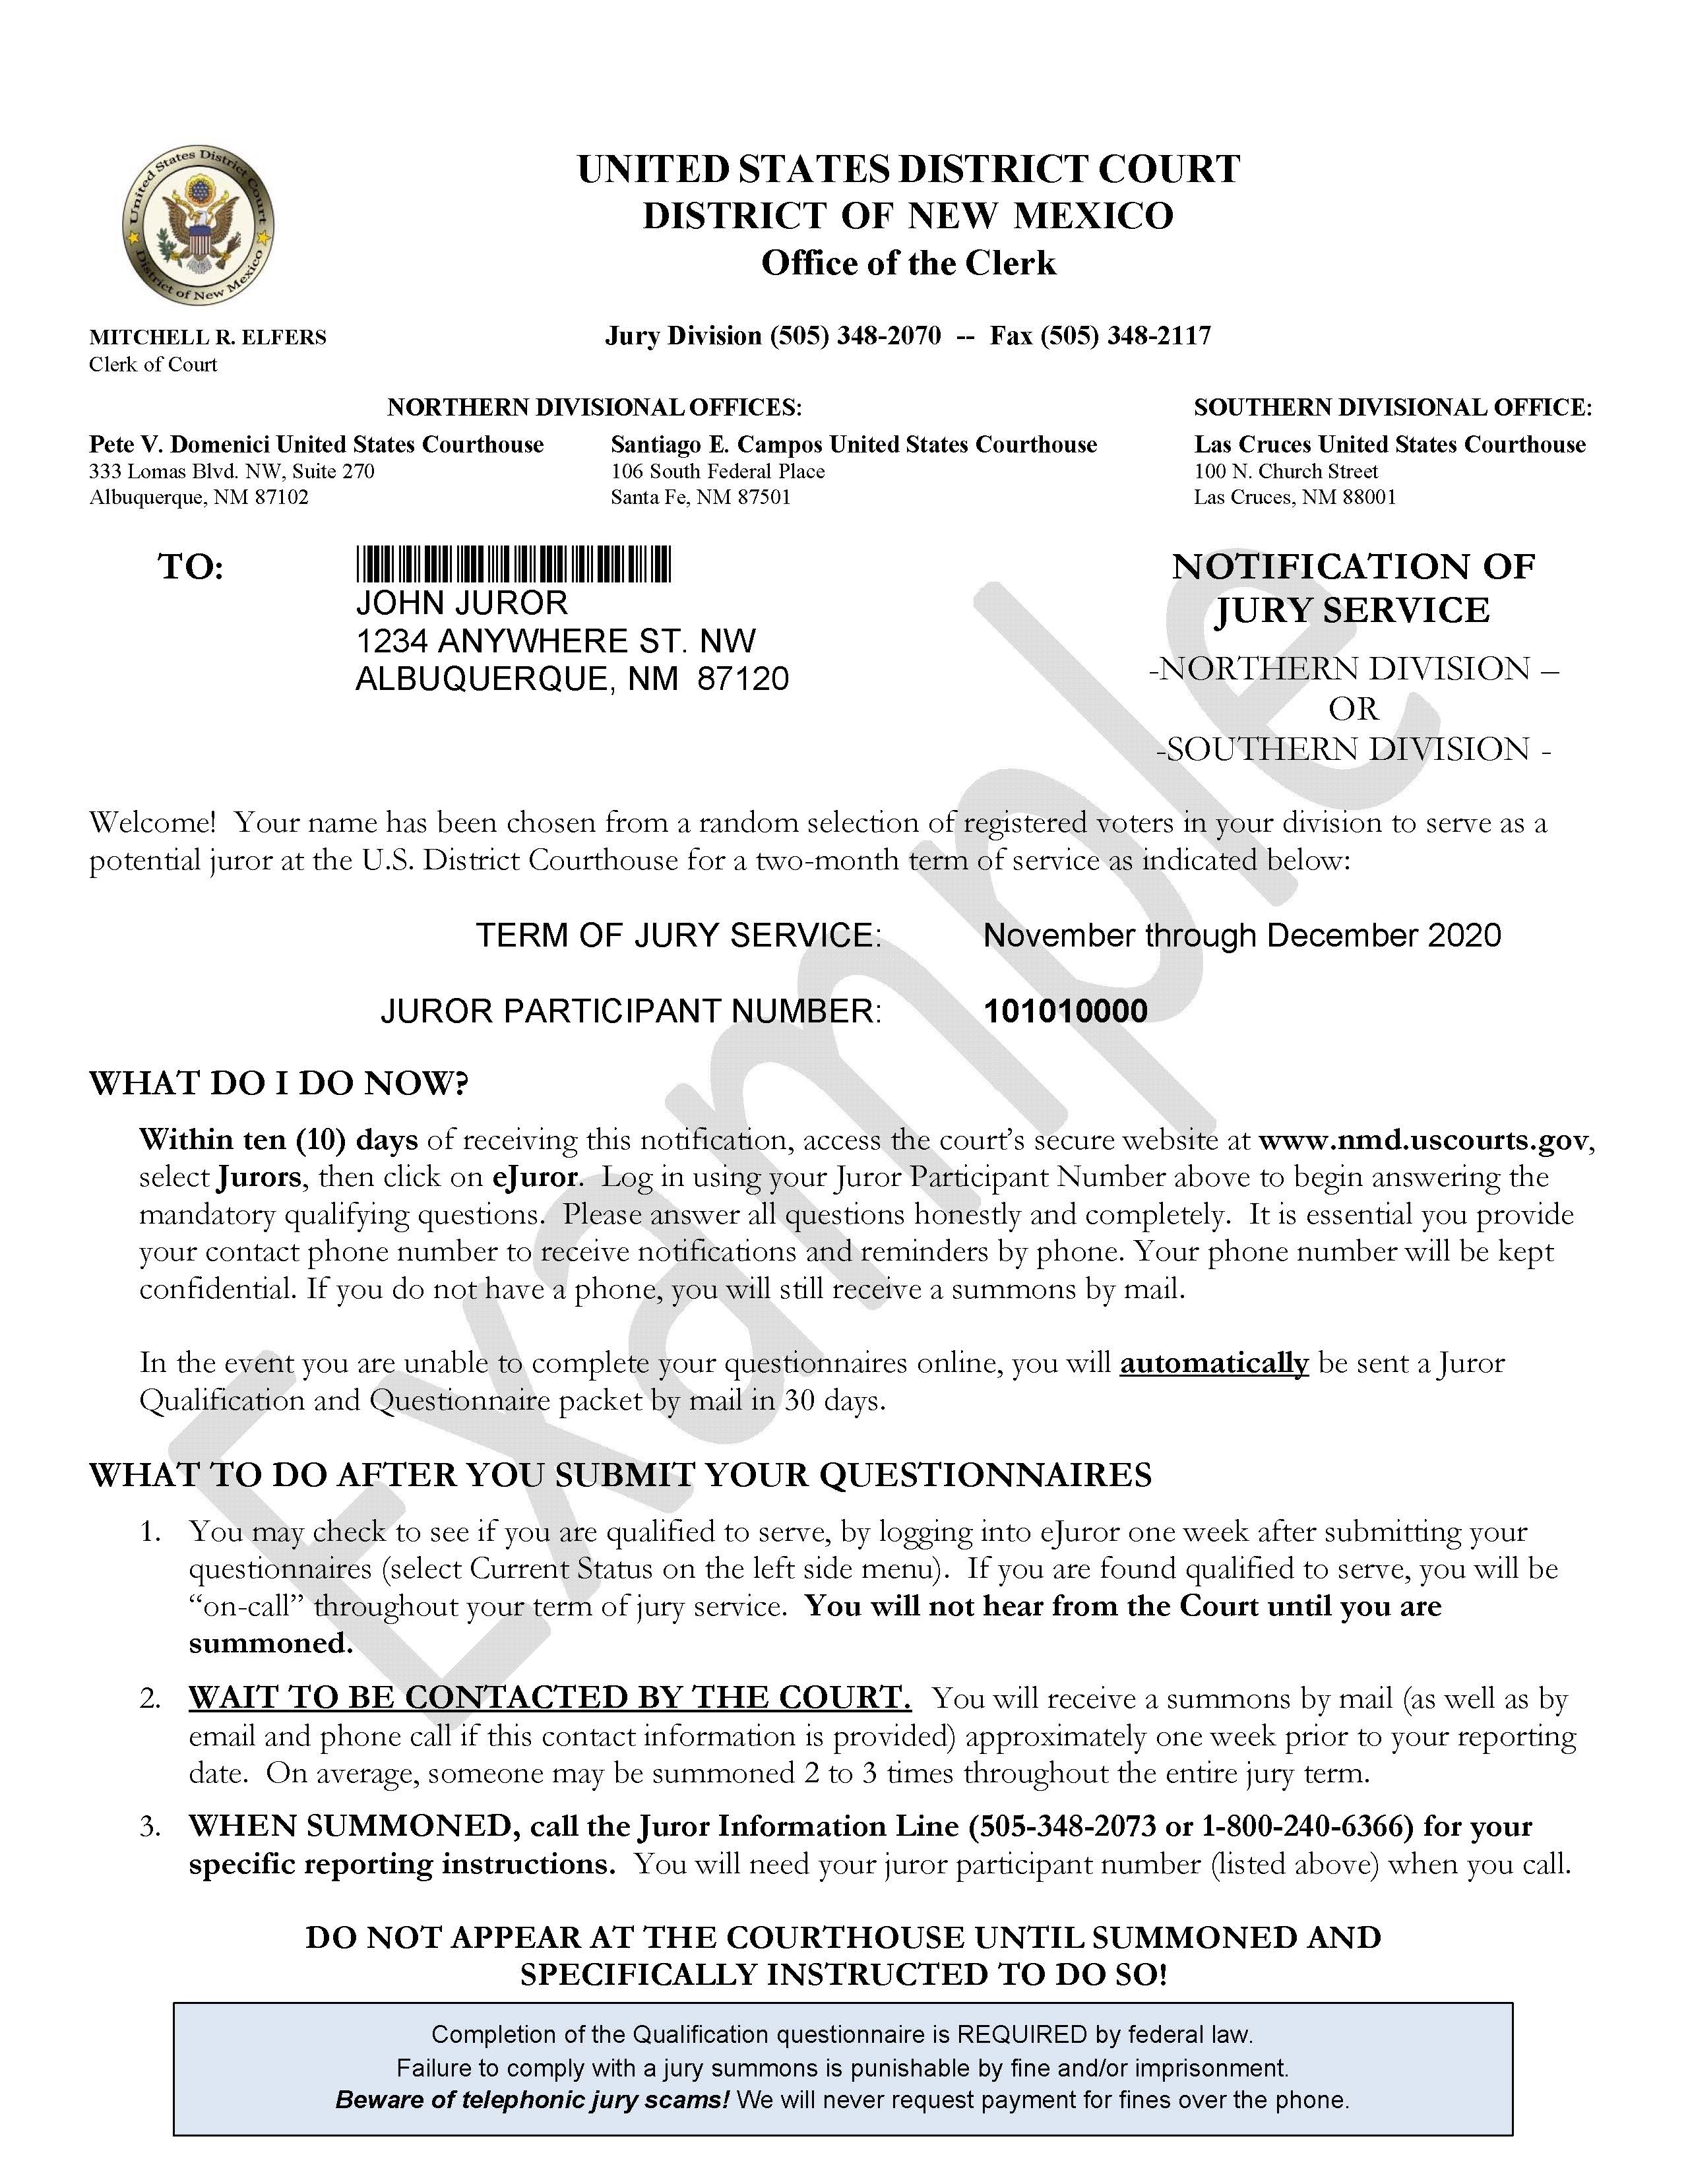 Notification Of Jury Service Information District Of New Mexico